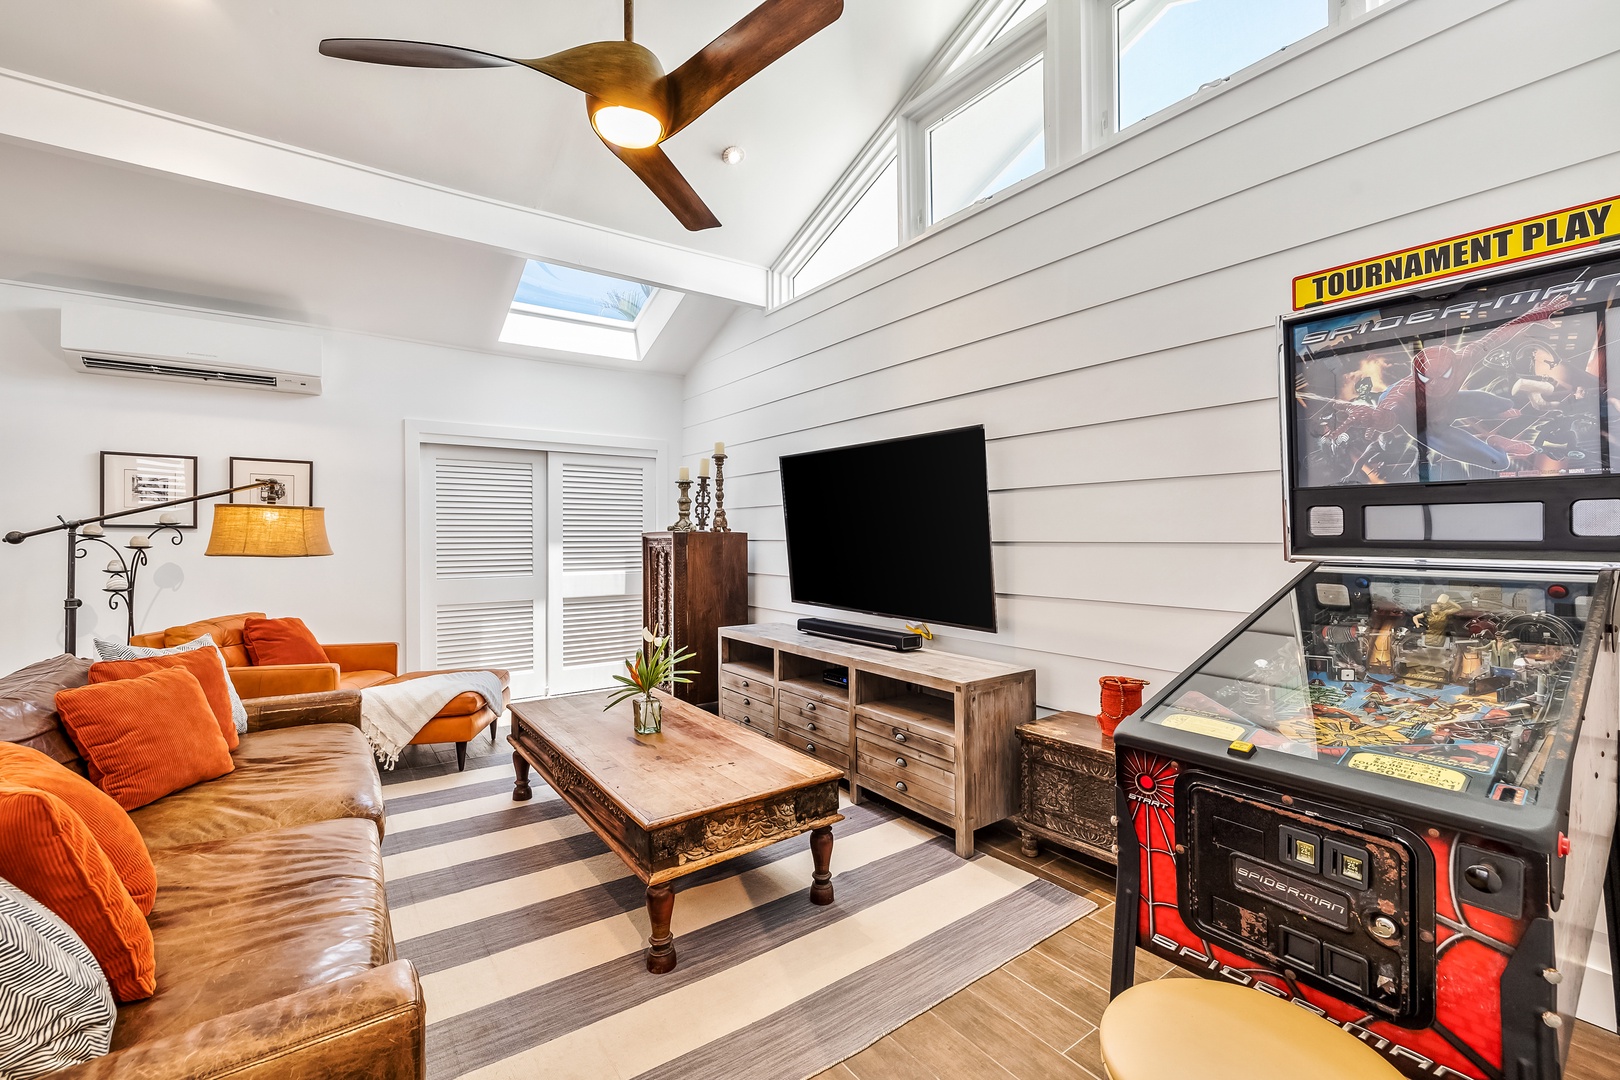 Kailua Vacation Rentals, Hale Ohana - Gather here for a movie night or to catch up on your favorite shows